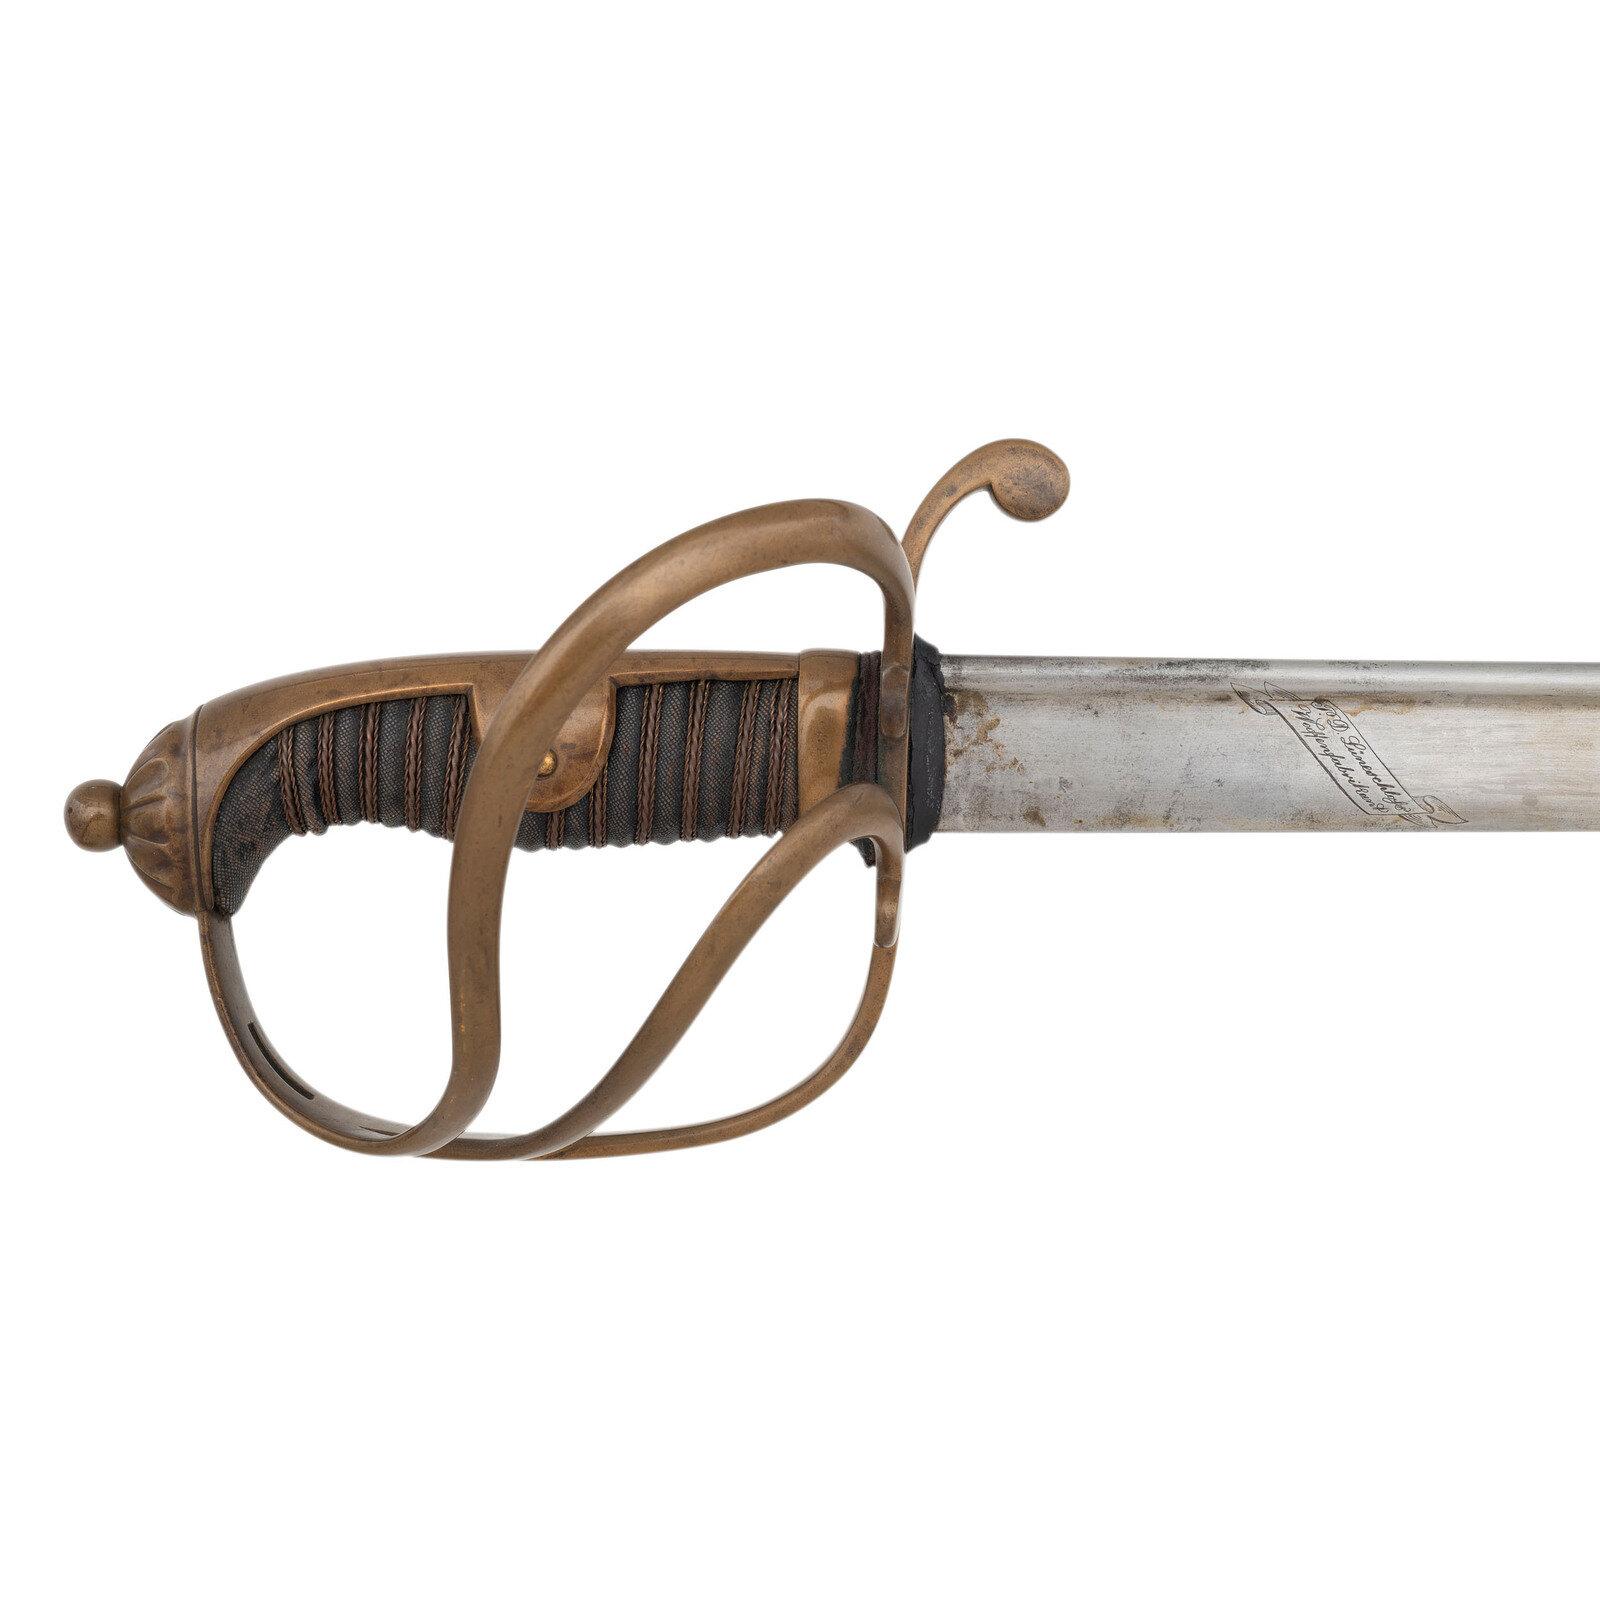 PDL British 1821 Pattern Sword Inscribed to Capt. Frank Chamberlain - WIA at Gettysburg